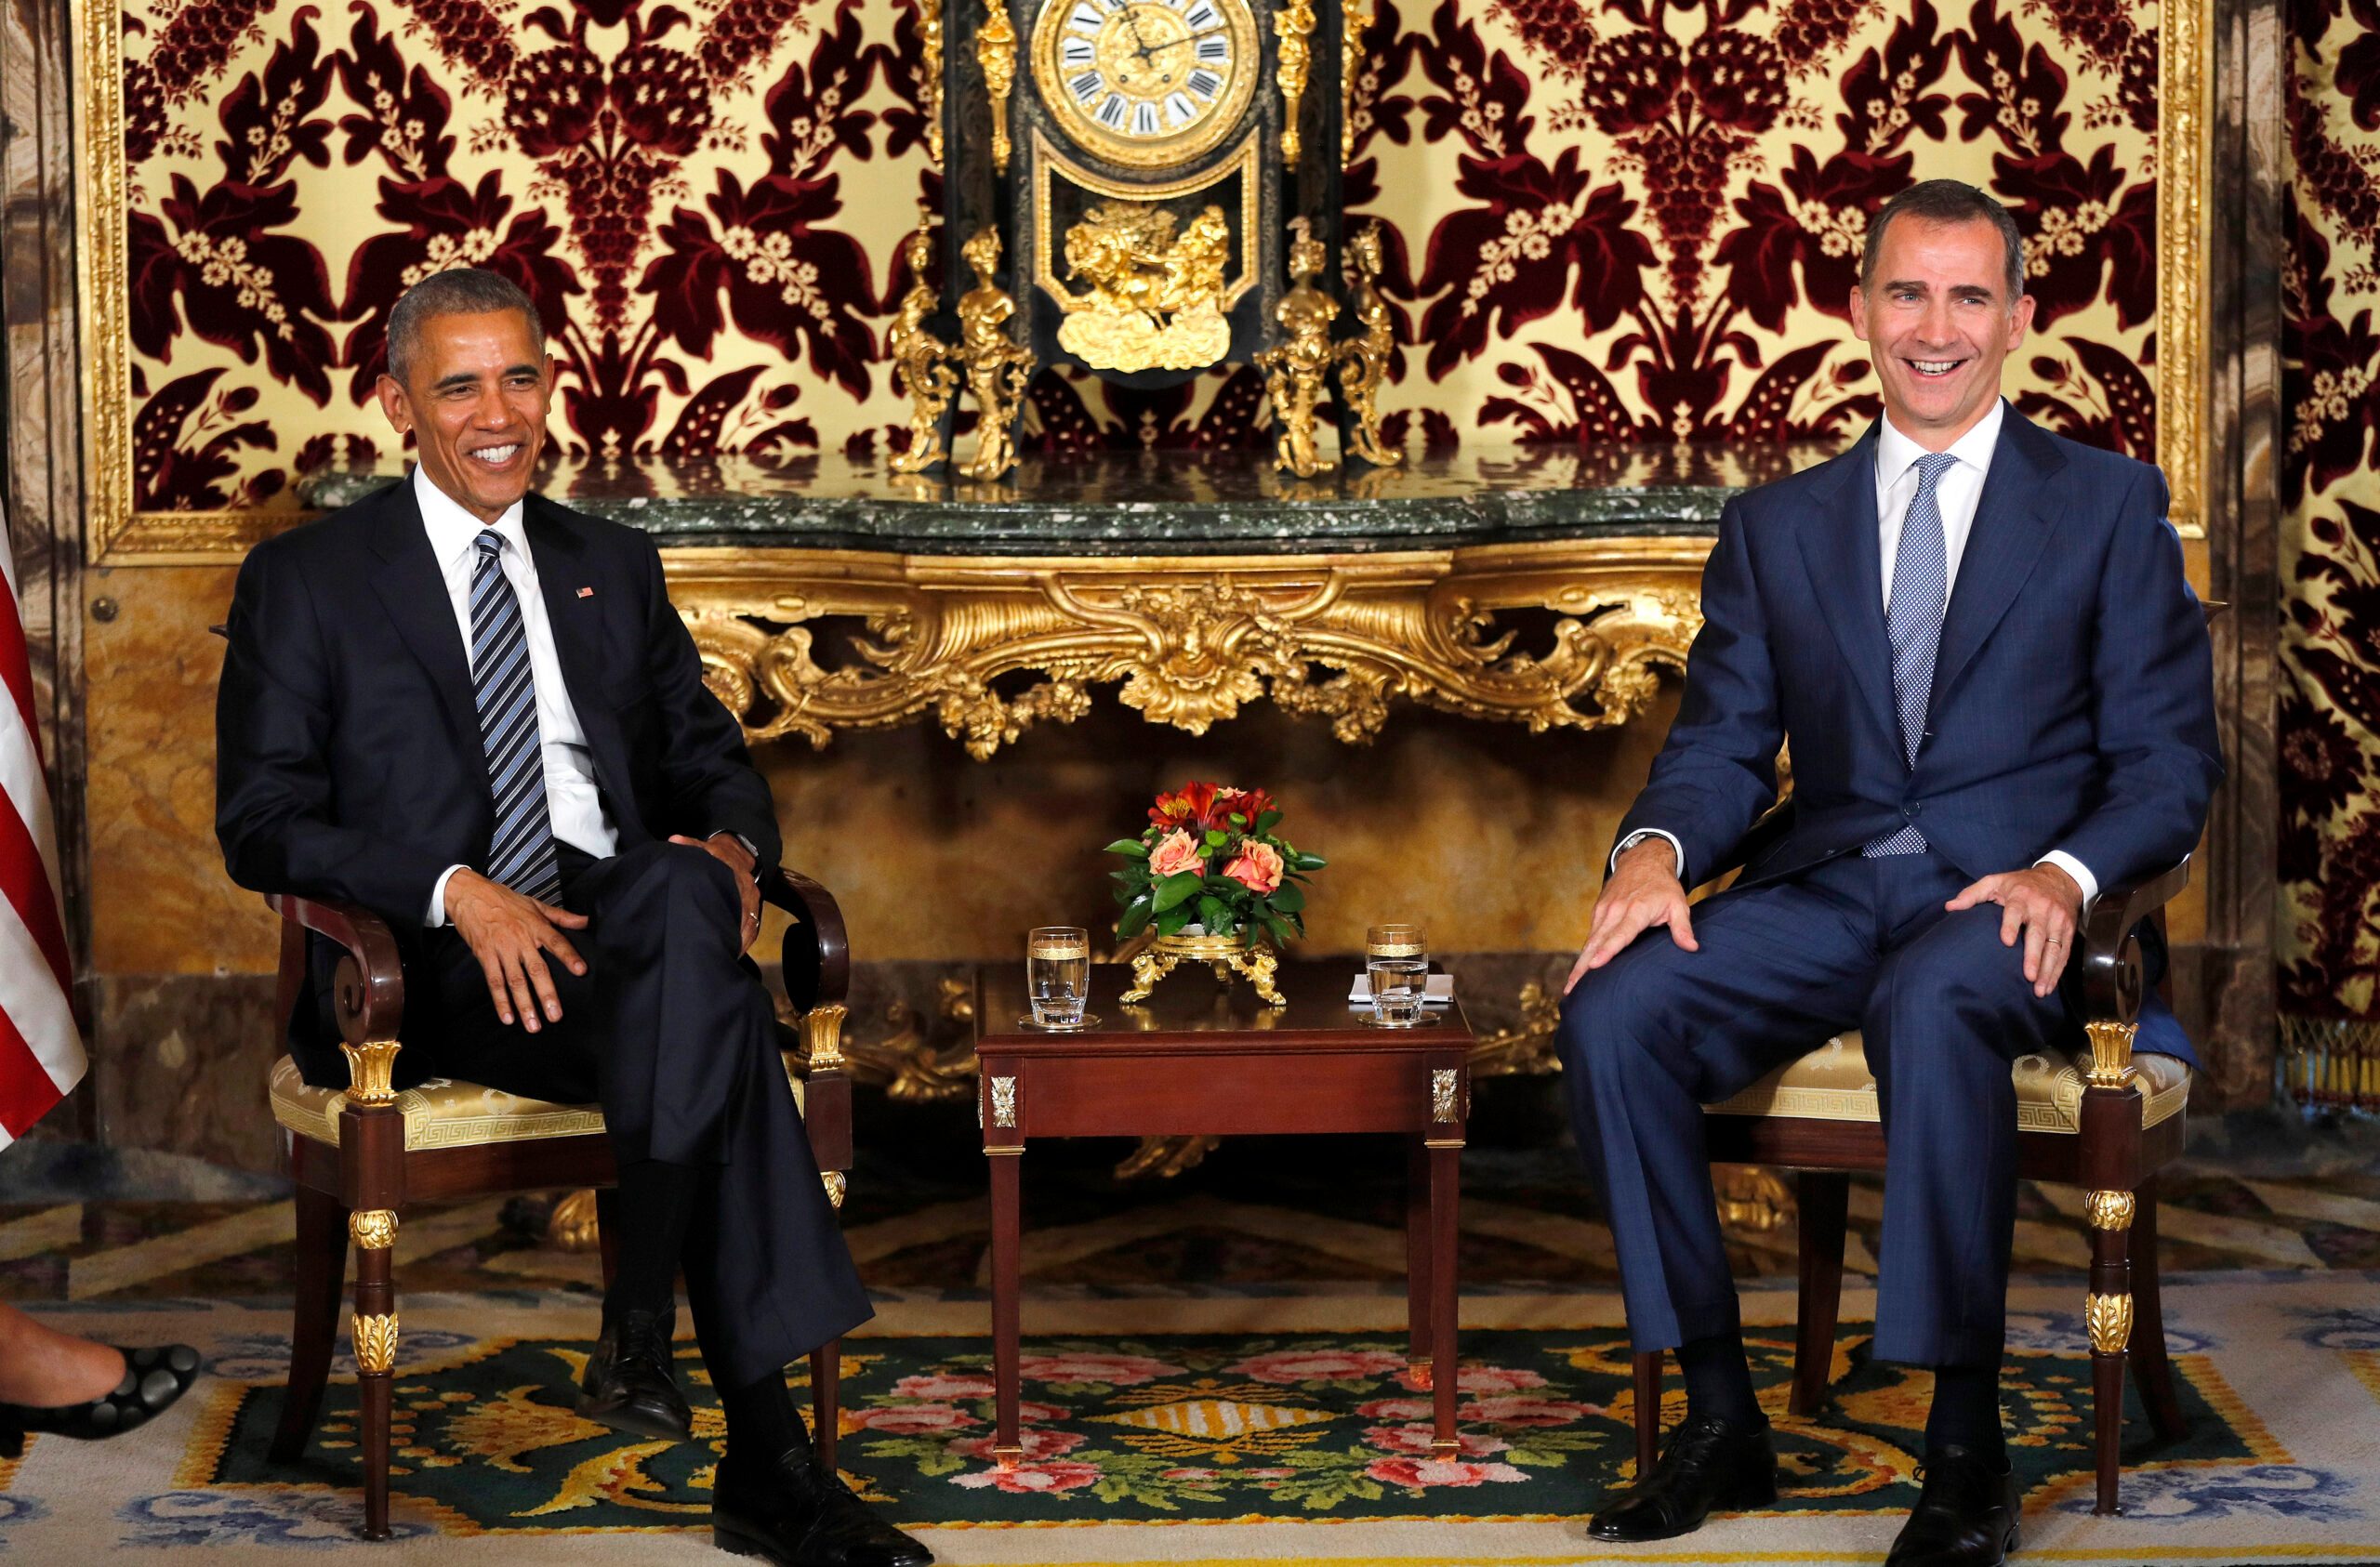 Obama meets Spanish King on symbolic but curtailed trip